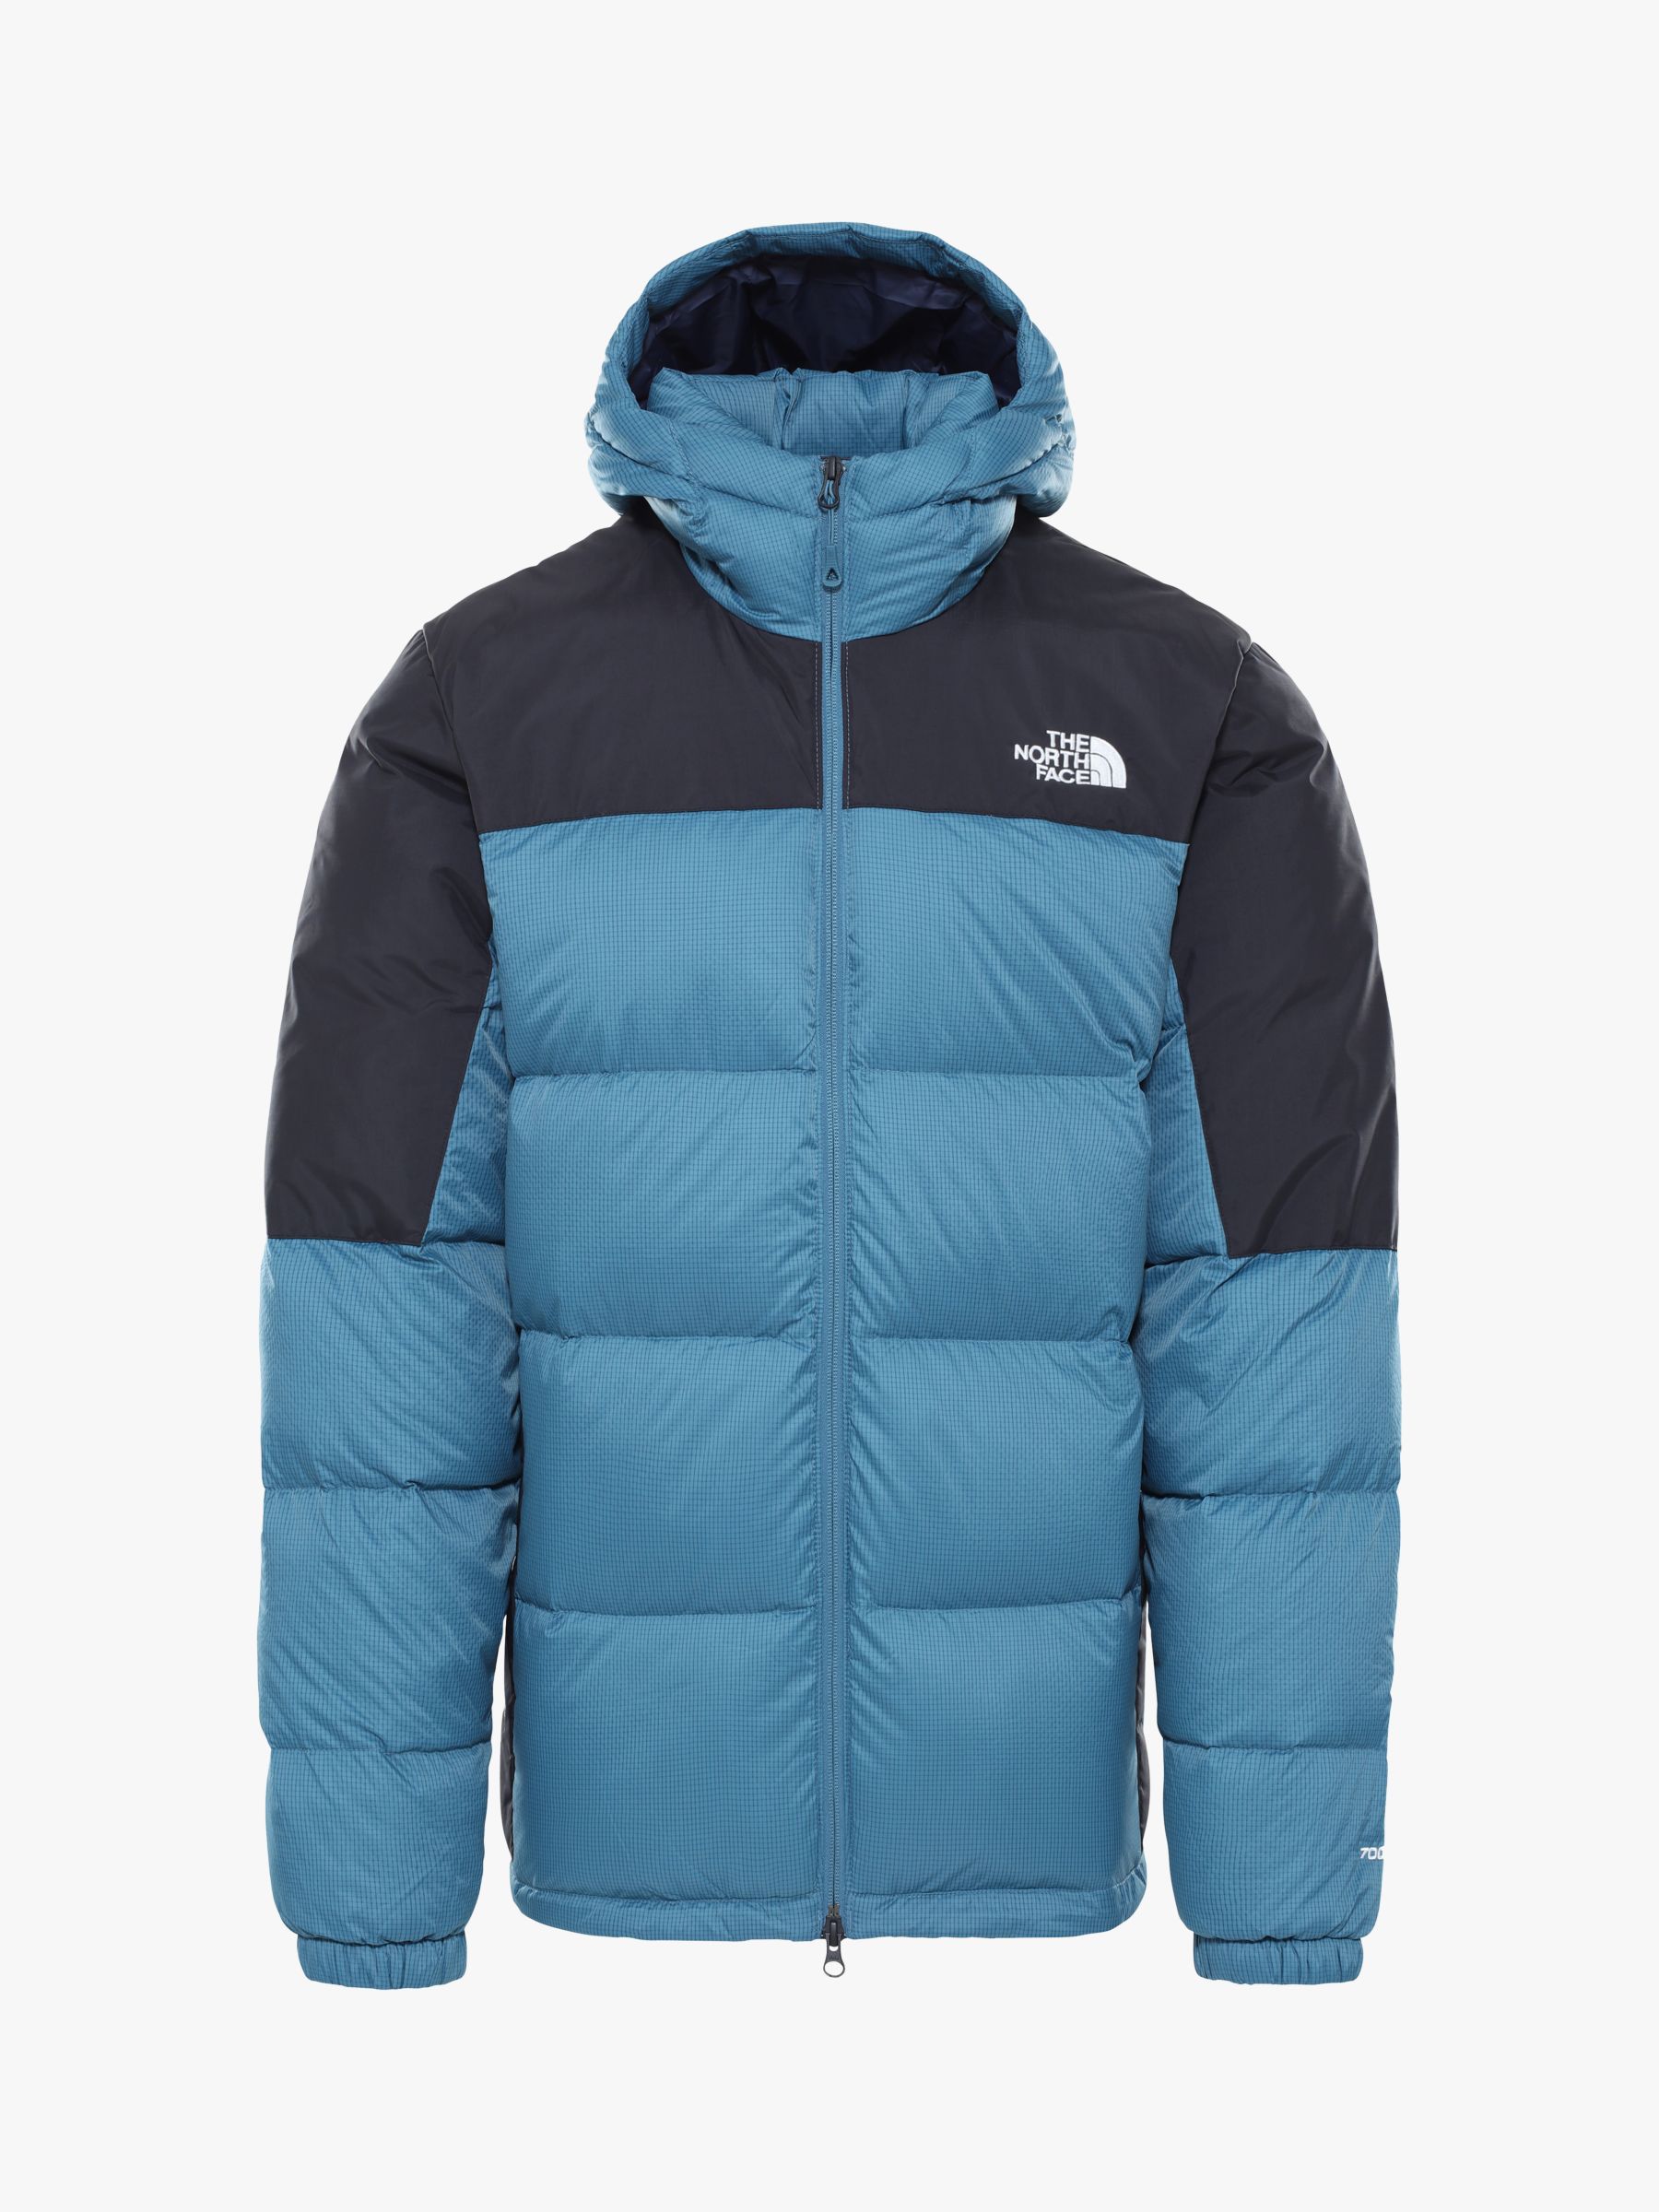 blue and black north face coat